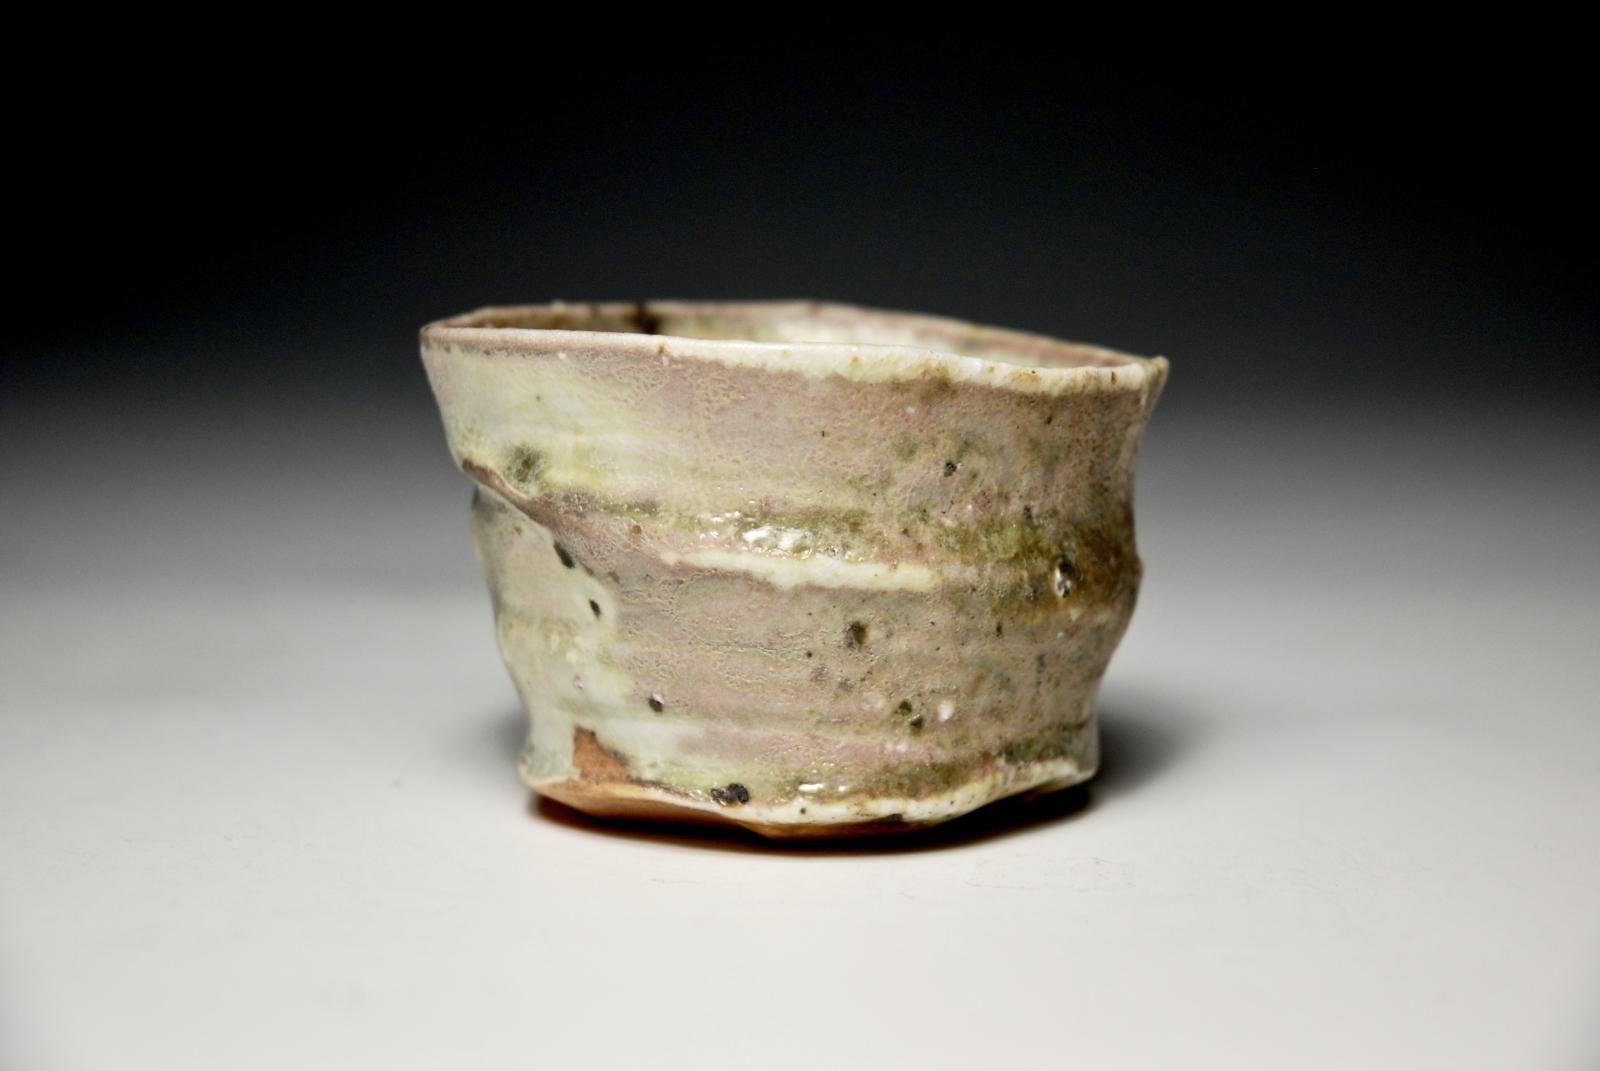 Petit Cup.  Individual Slow Thrown and Hand Trimmed Foot.  Porcelain Body with Local Sourced Indigenous Rock Grits and Celadon Glaze. by Sim Taylor